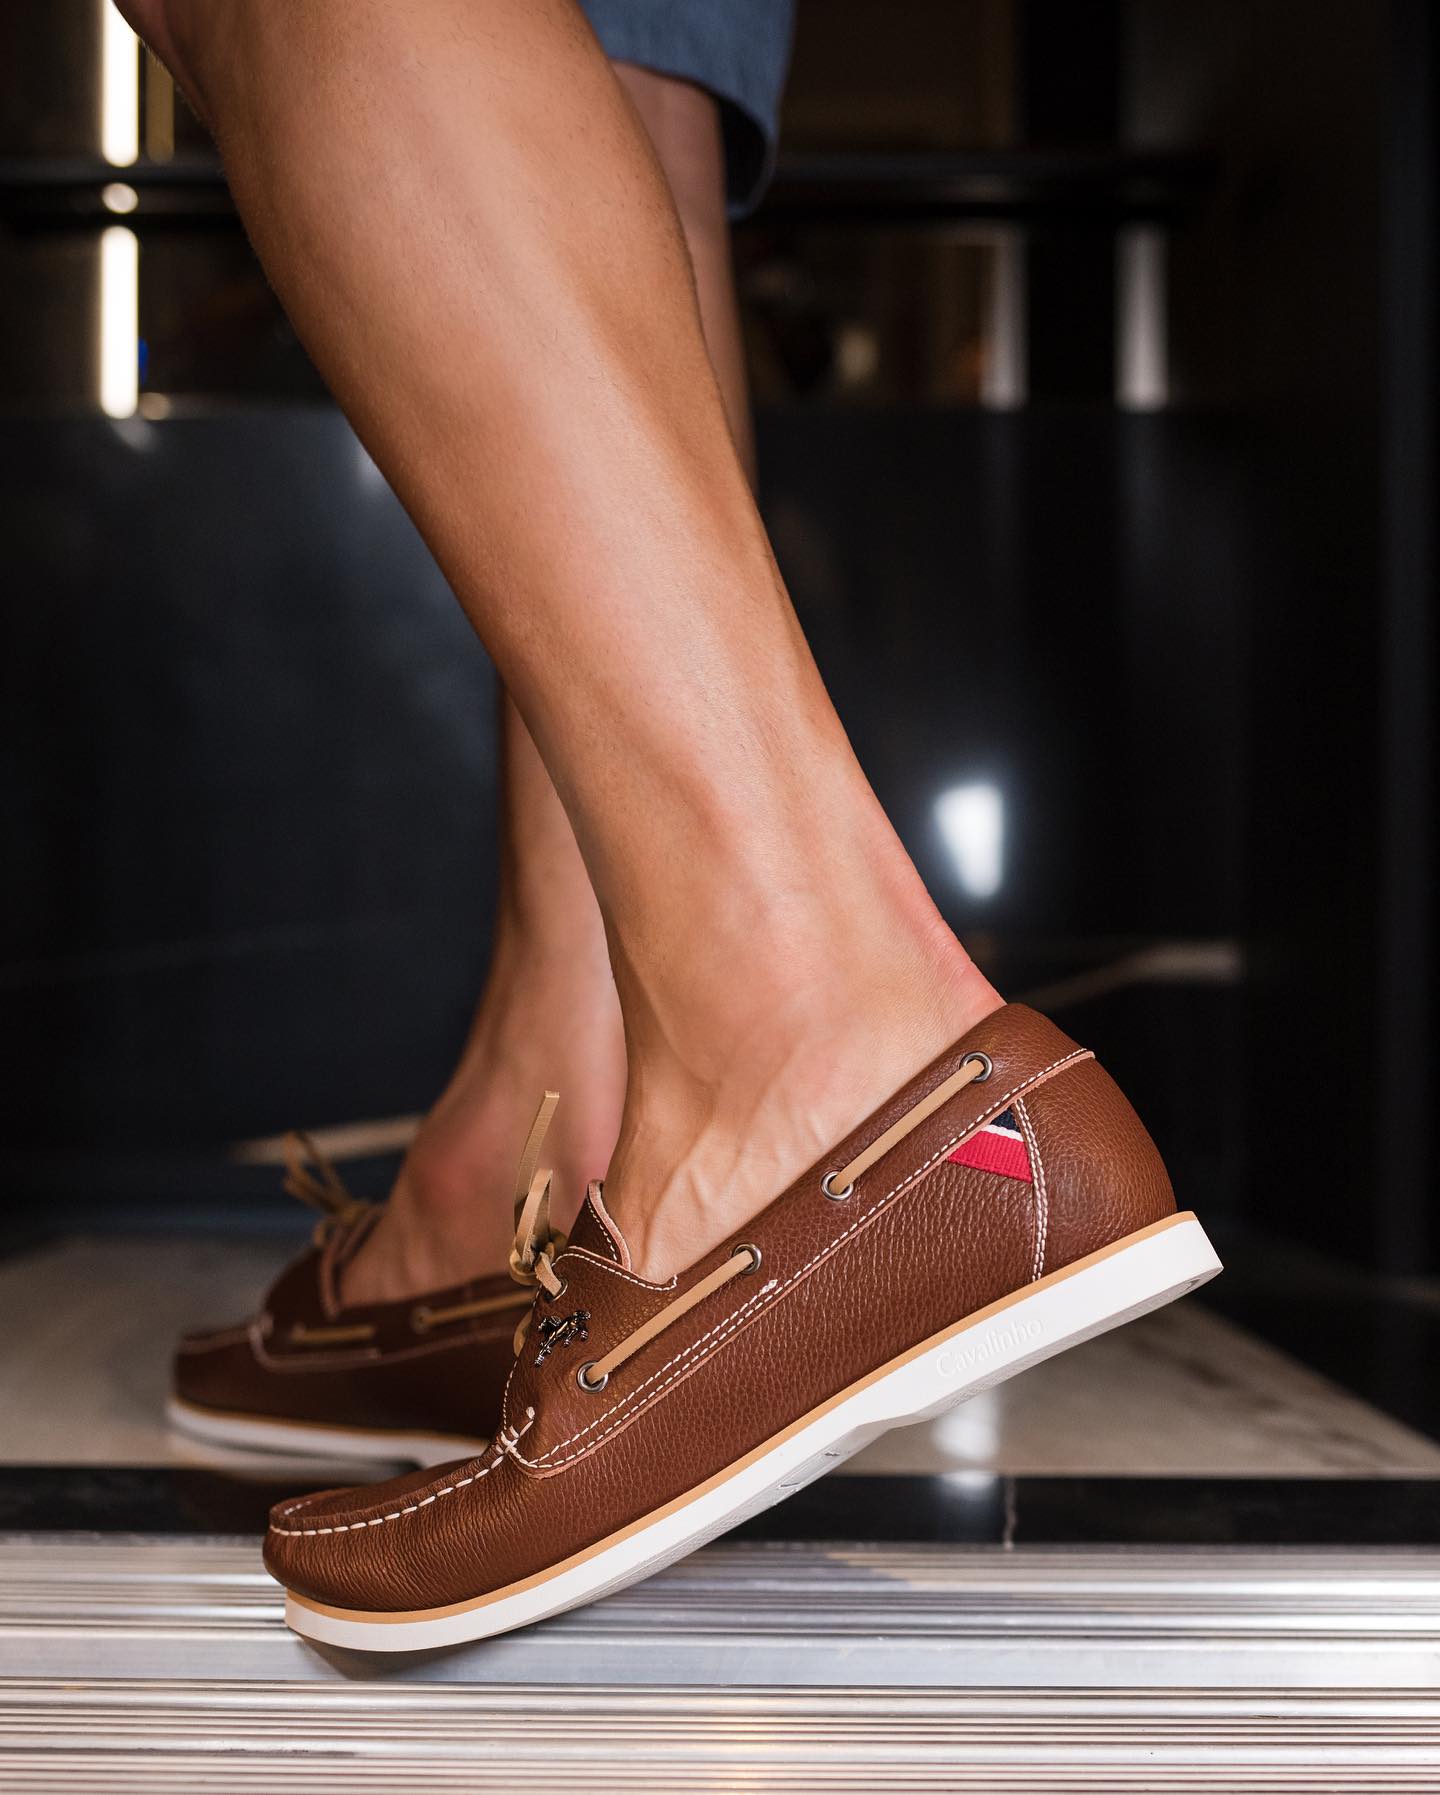 The Sailor Boat Shoes